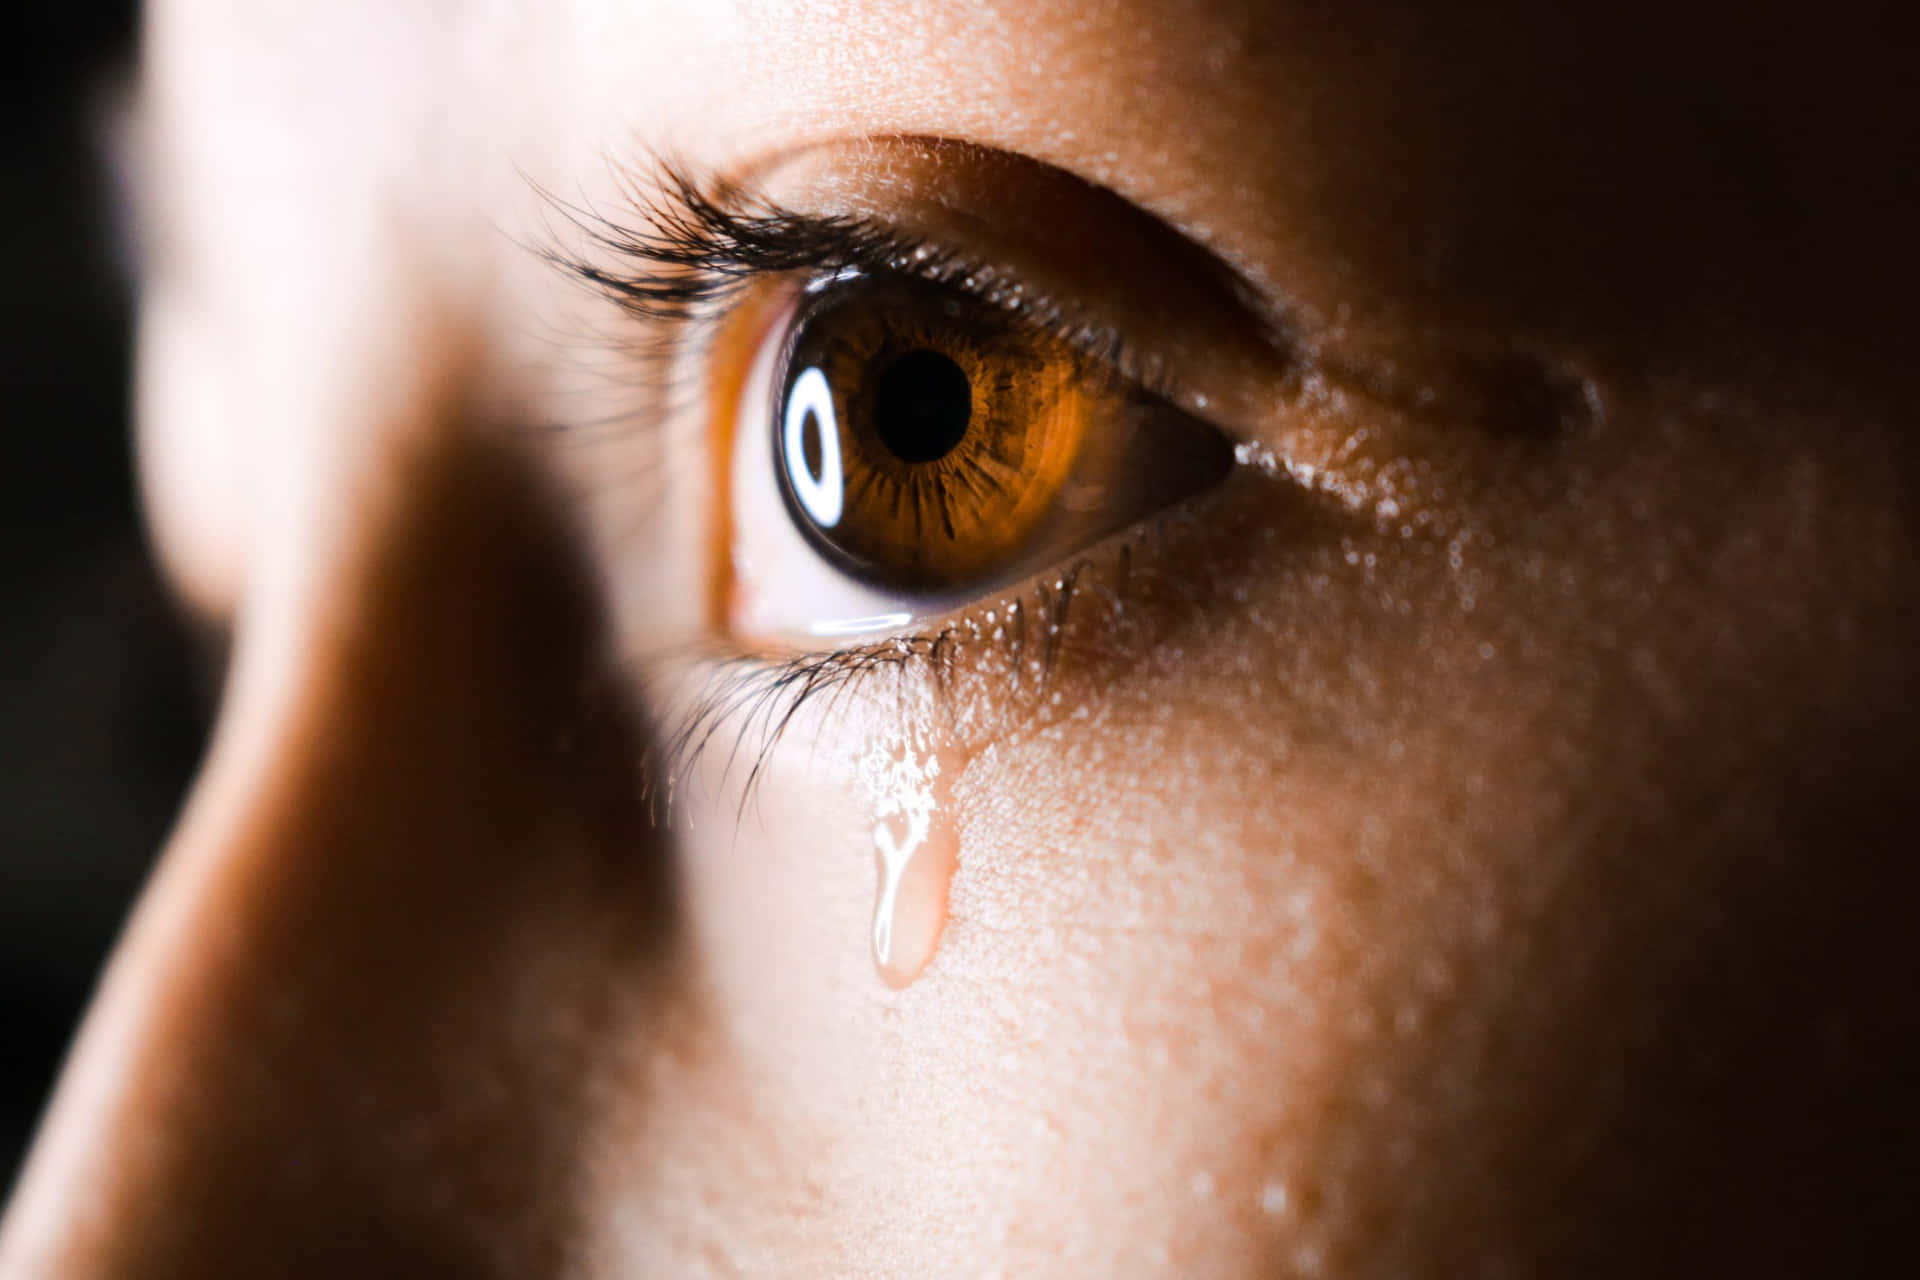 A Woman's Eye Is Crying With Tears